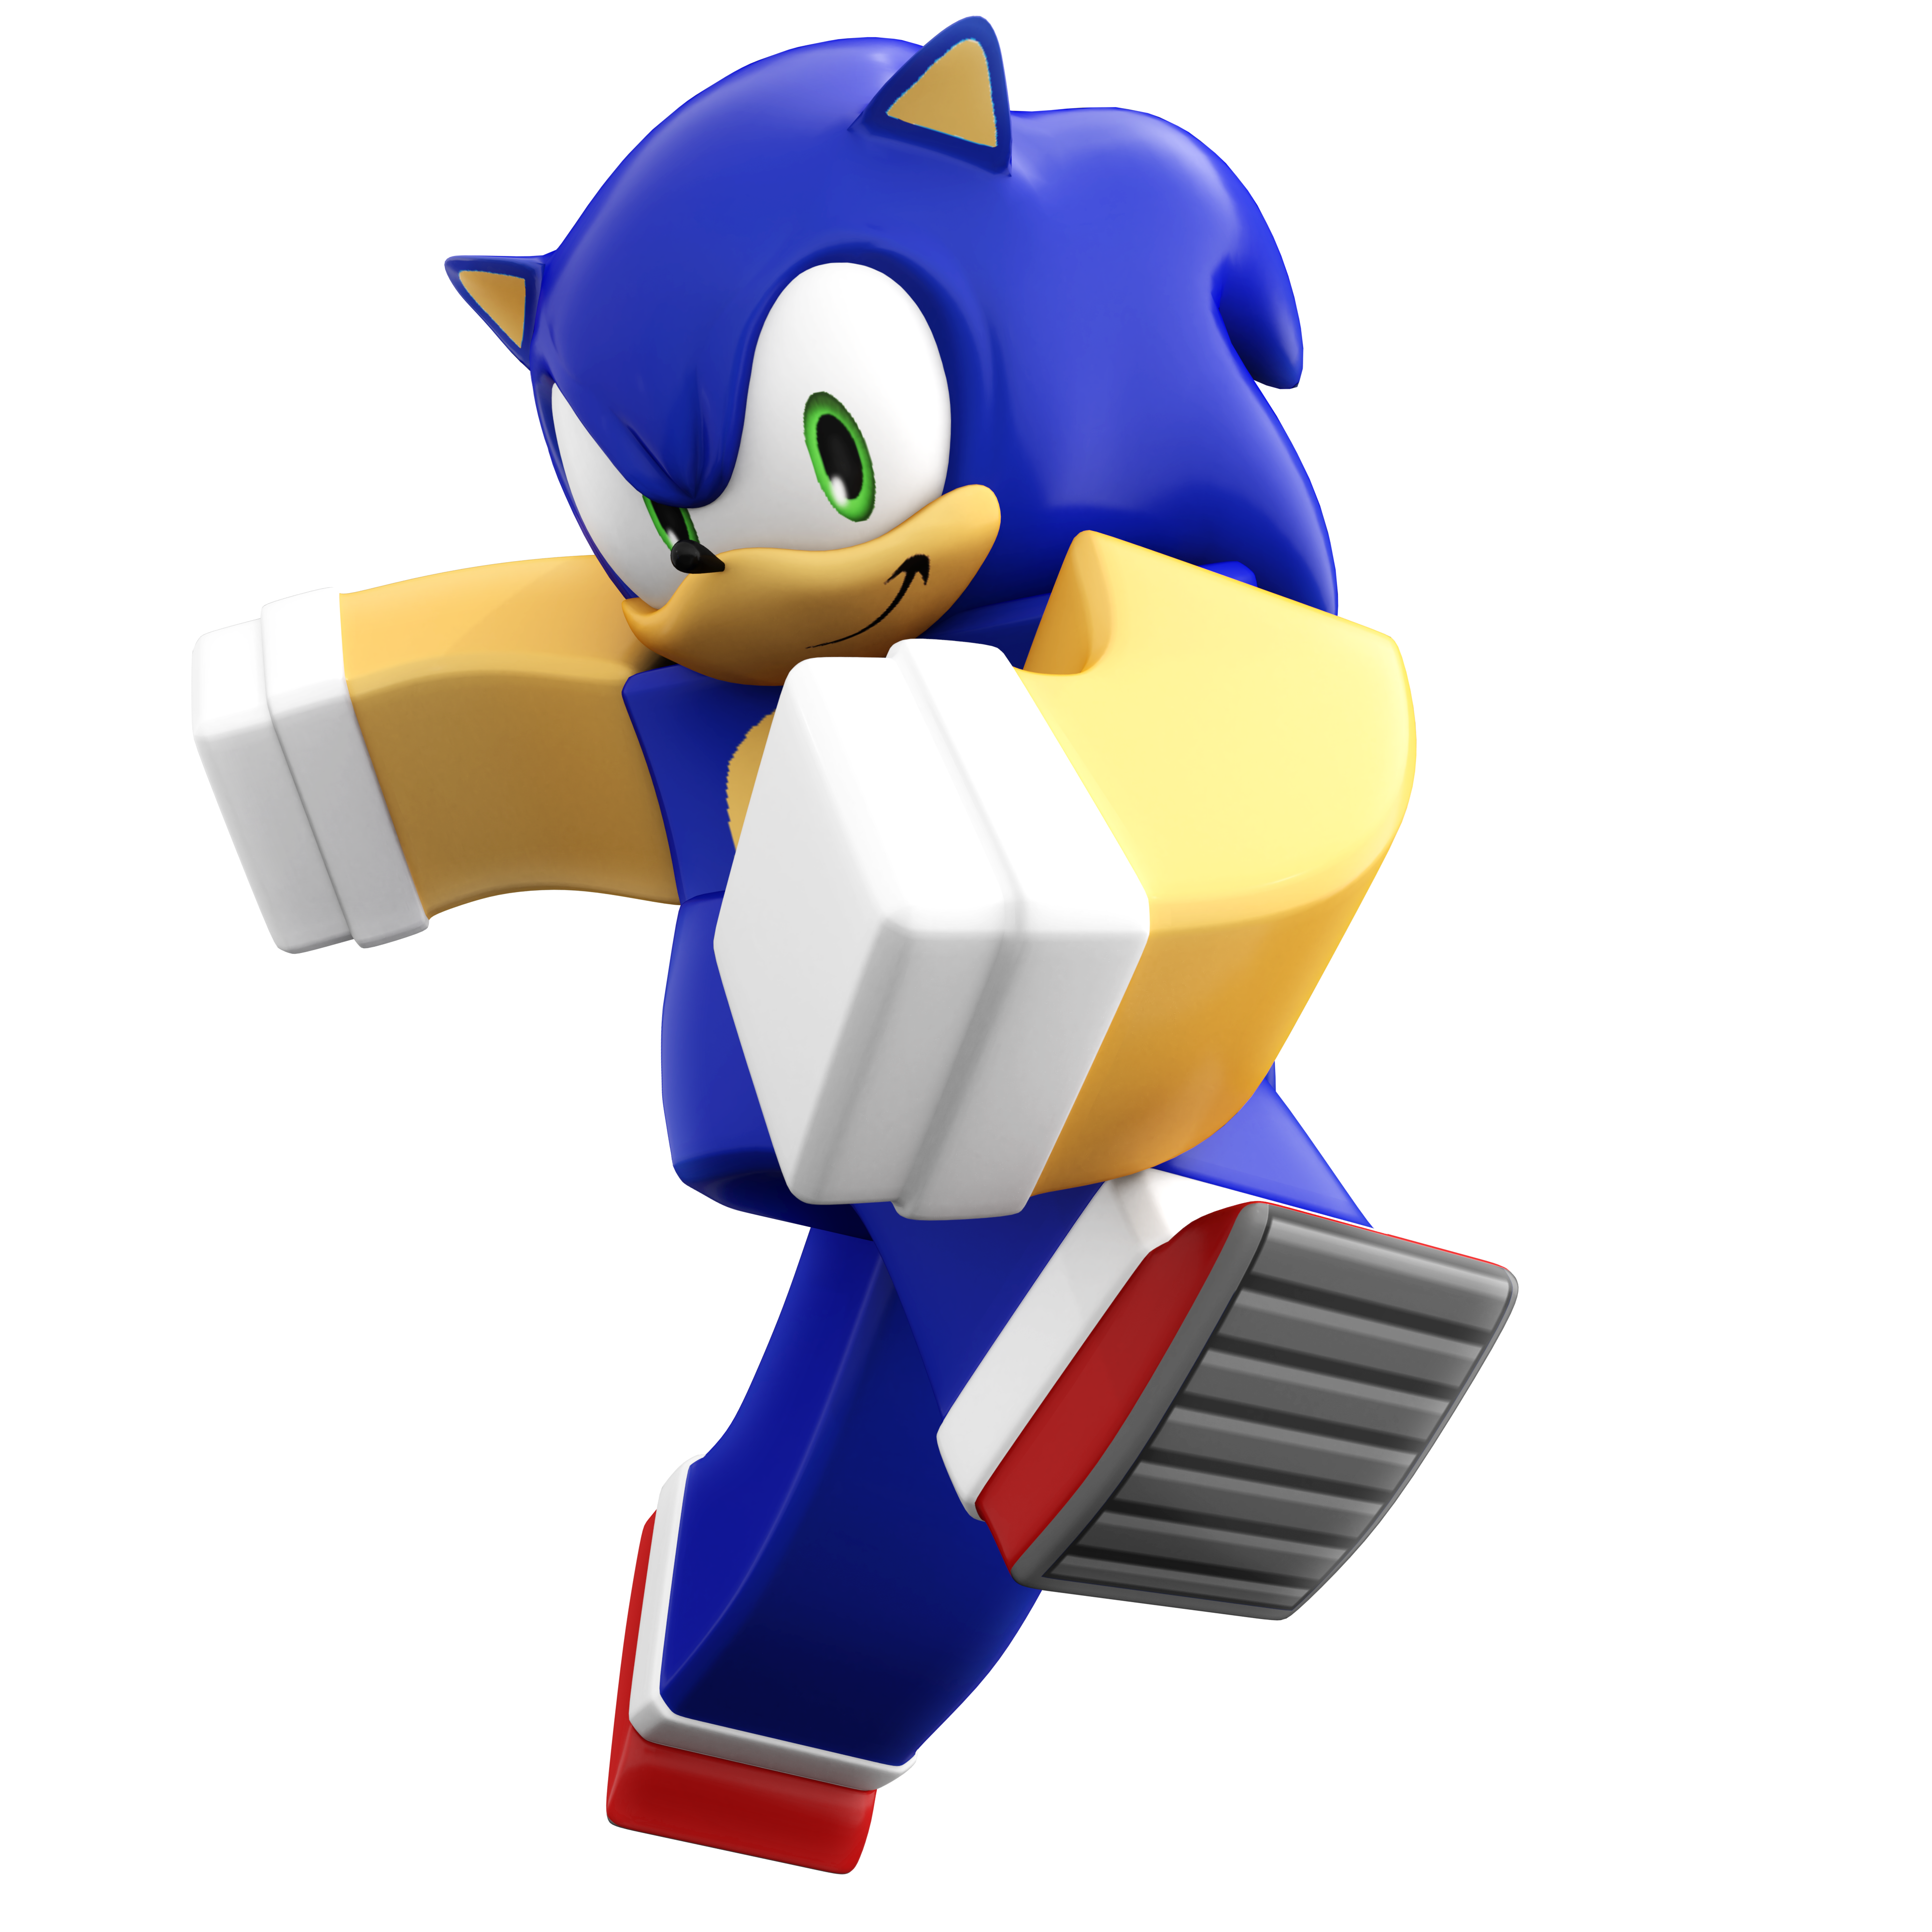 Sonic The Roblox Hedgehog By Jaysonjeanchannel On Deviantart - sonic head roblox